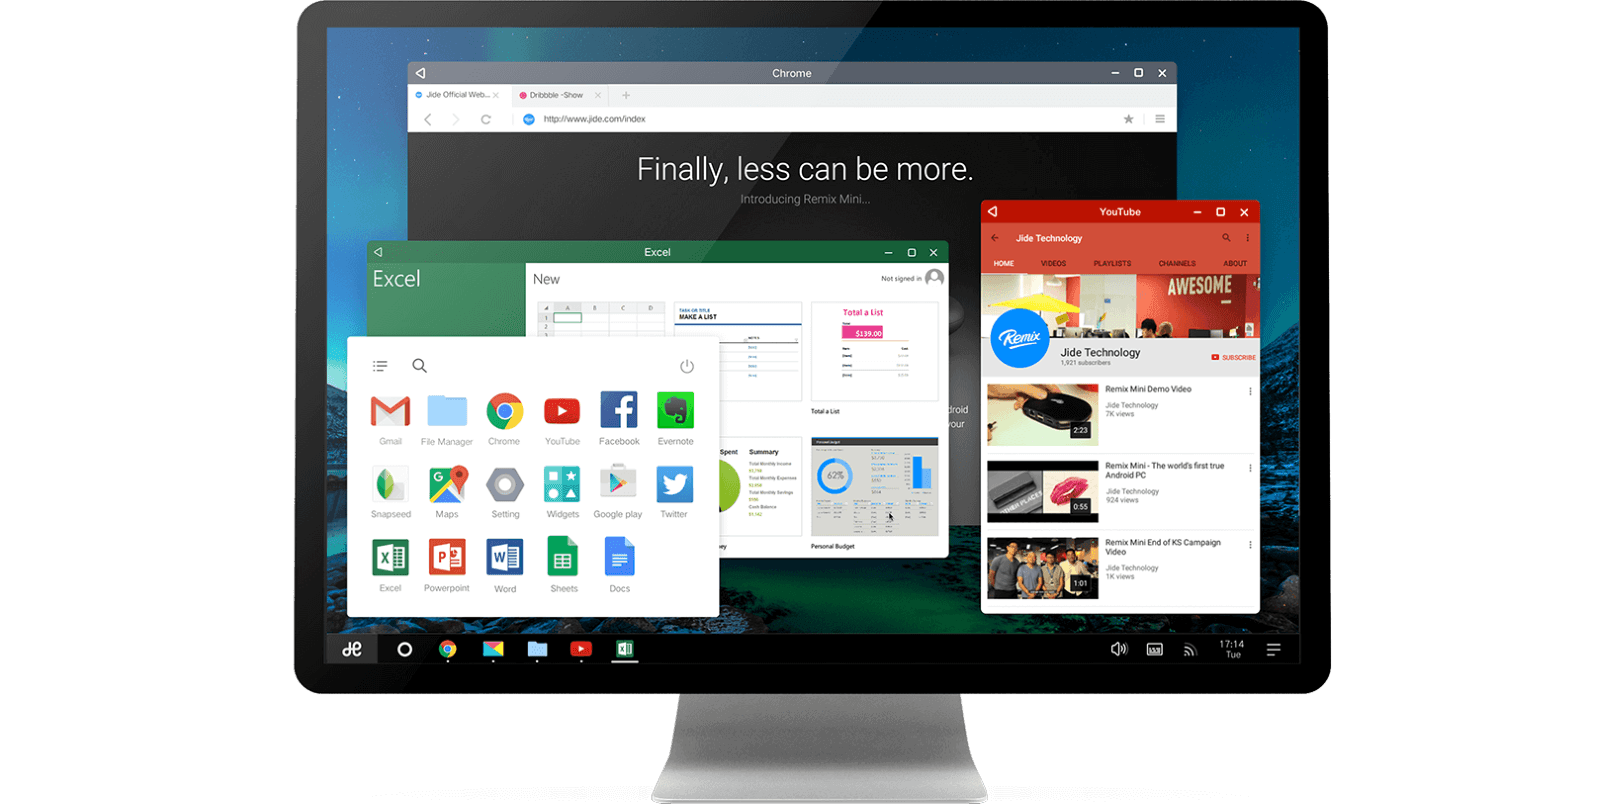 This isn't Android N (it's Remix OS), but it's an example of what Android could look like in the future.